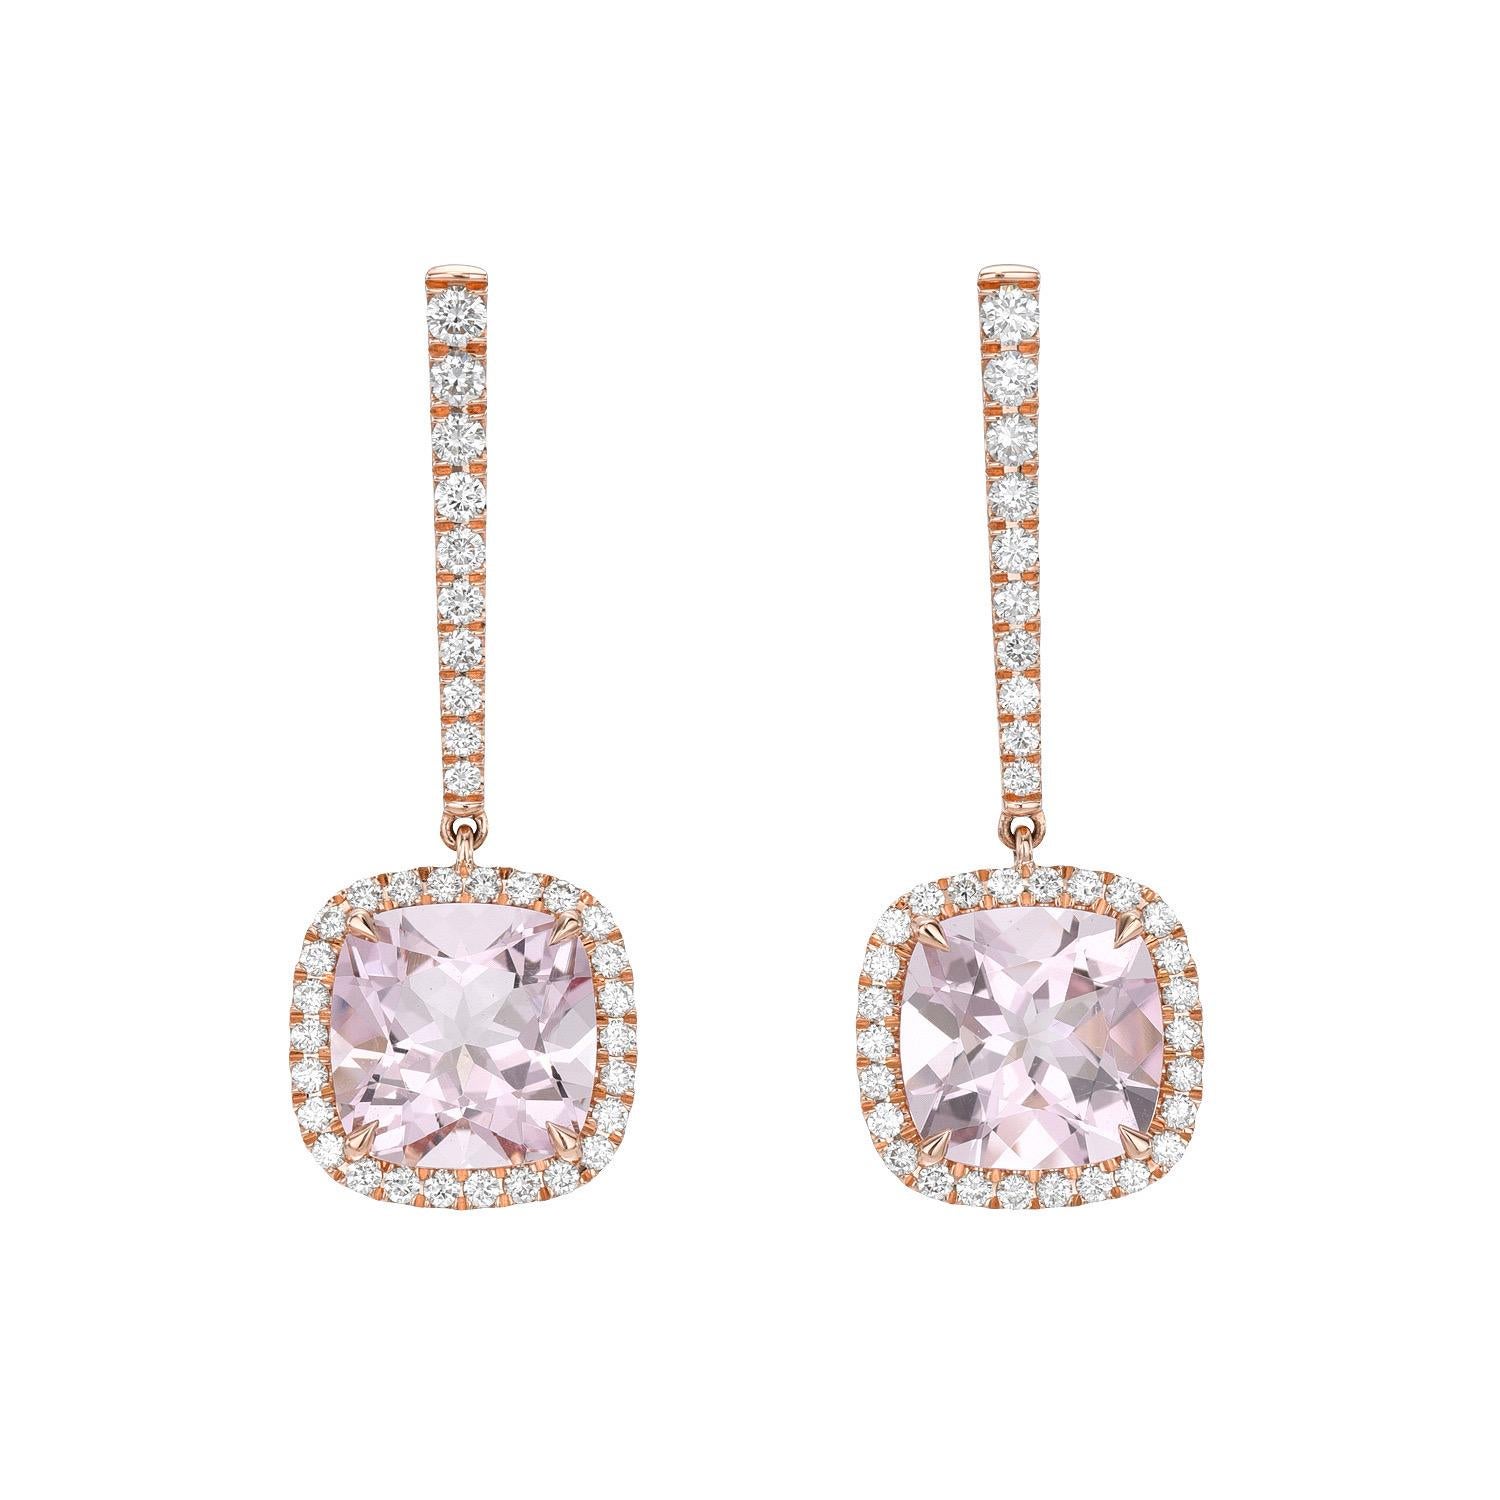 Contemporary Morganite Earrings 5.02 Carat Cushions For Sale